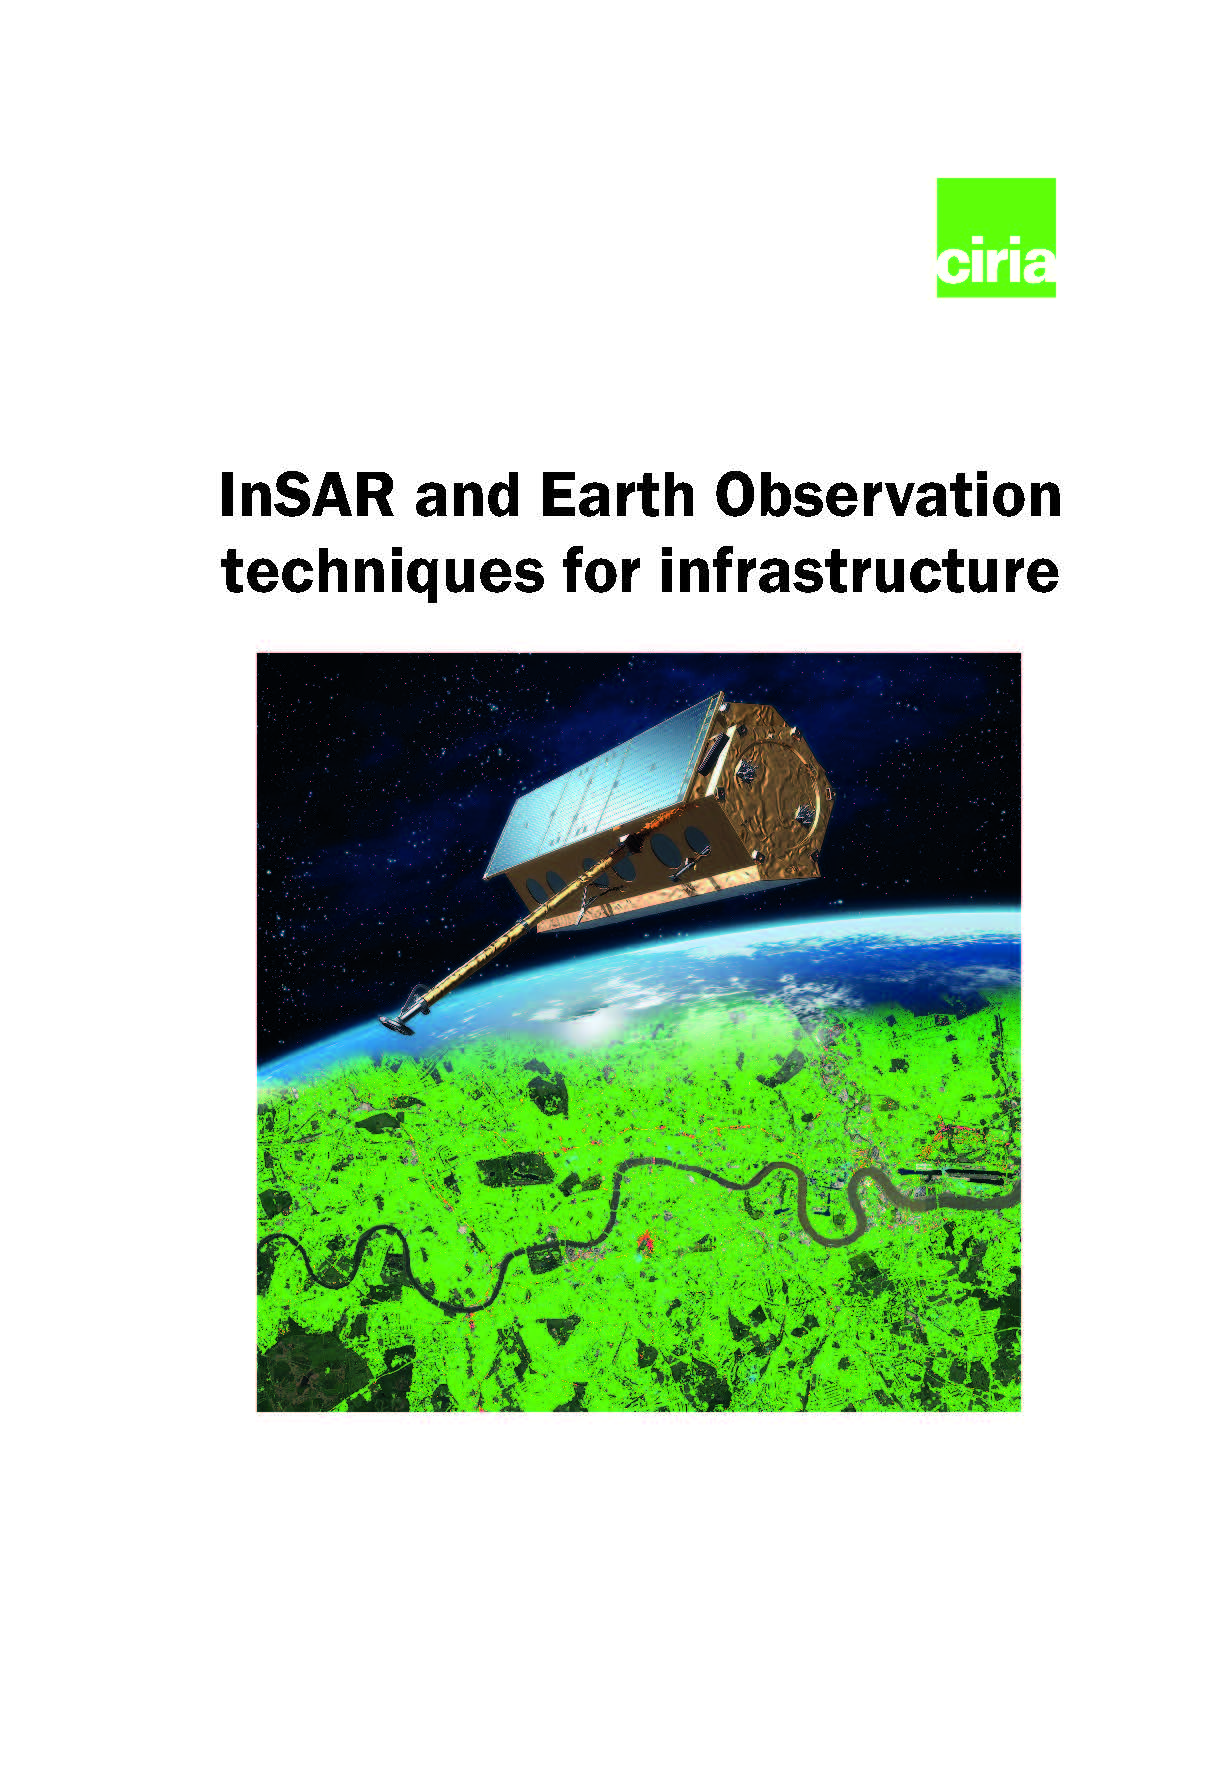 InSAR and Earth Observation techniques for infrastructure